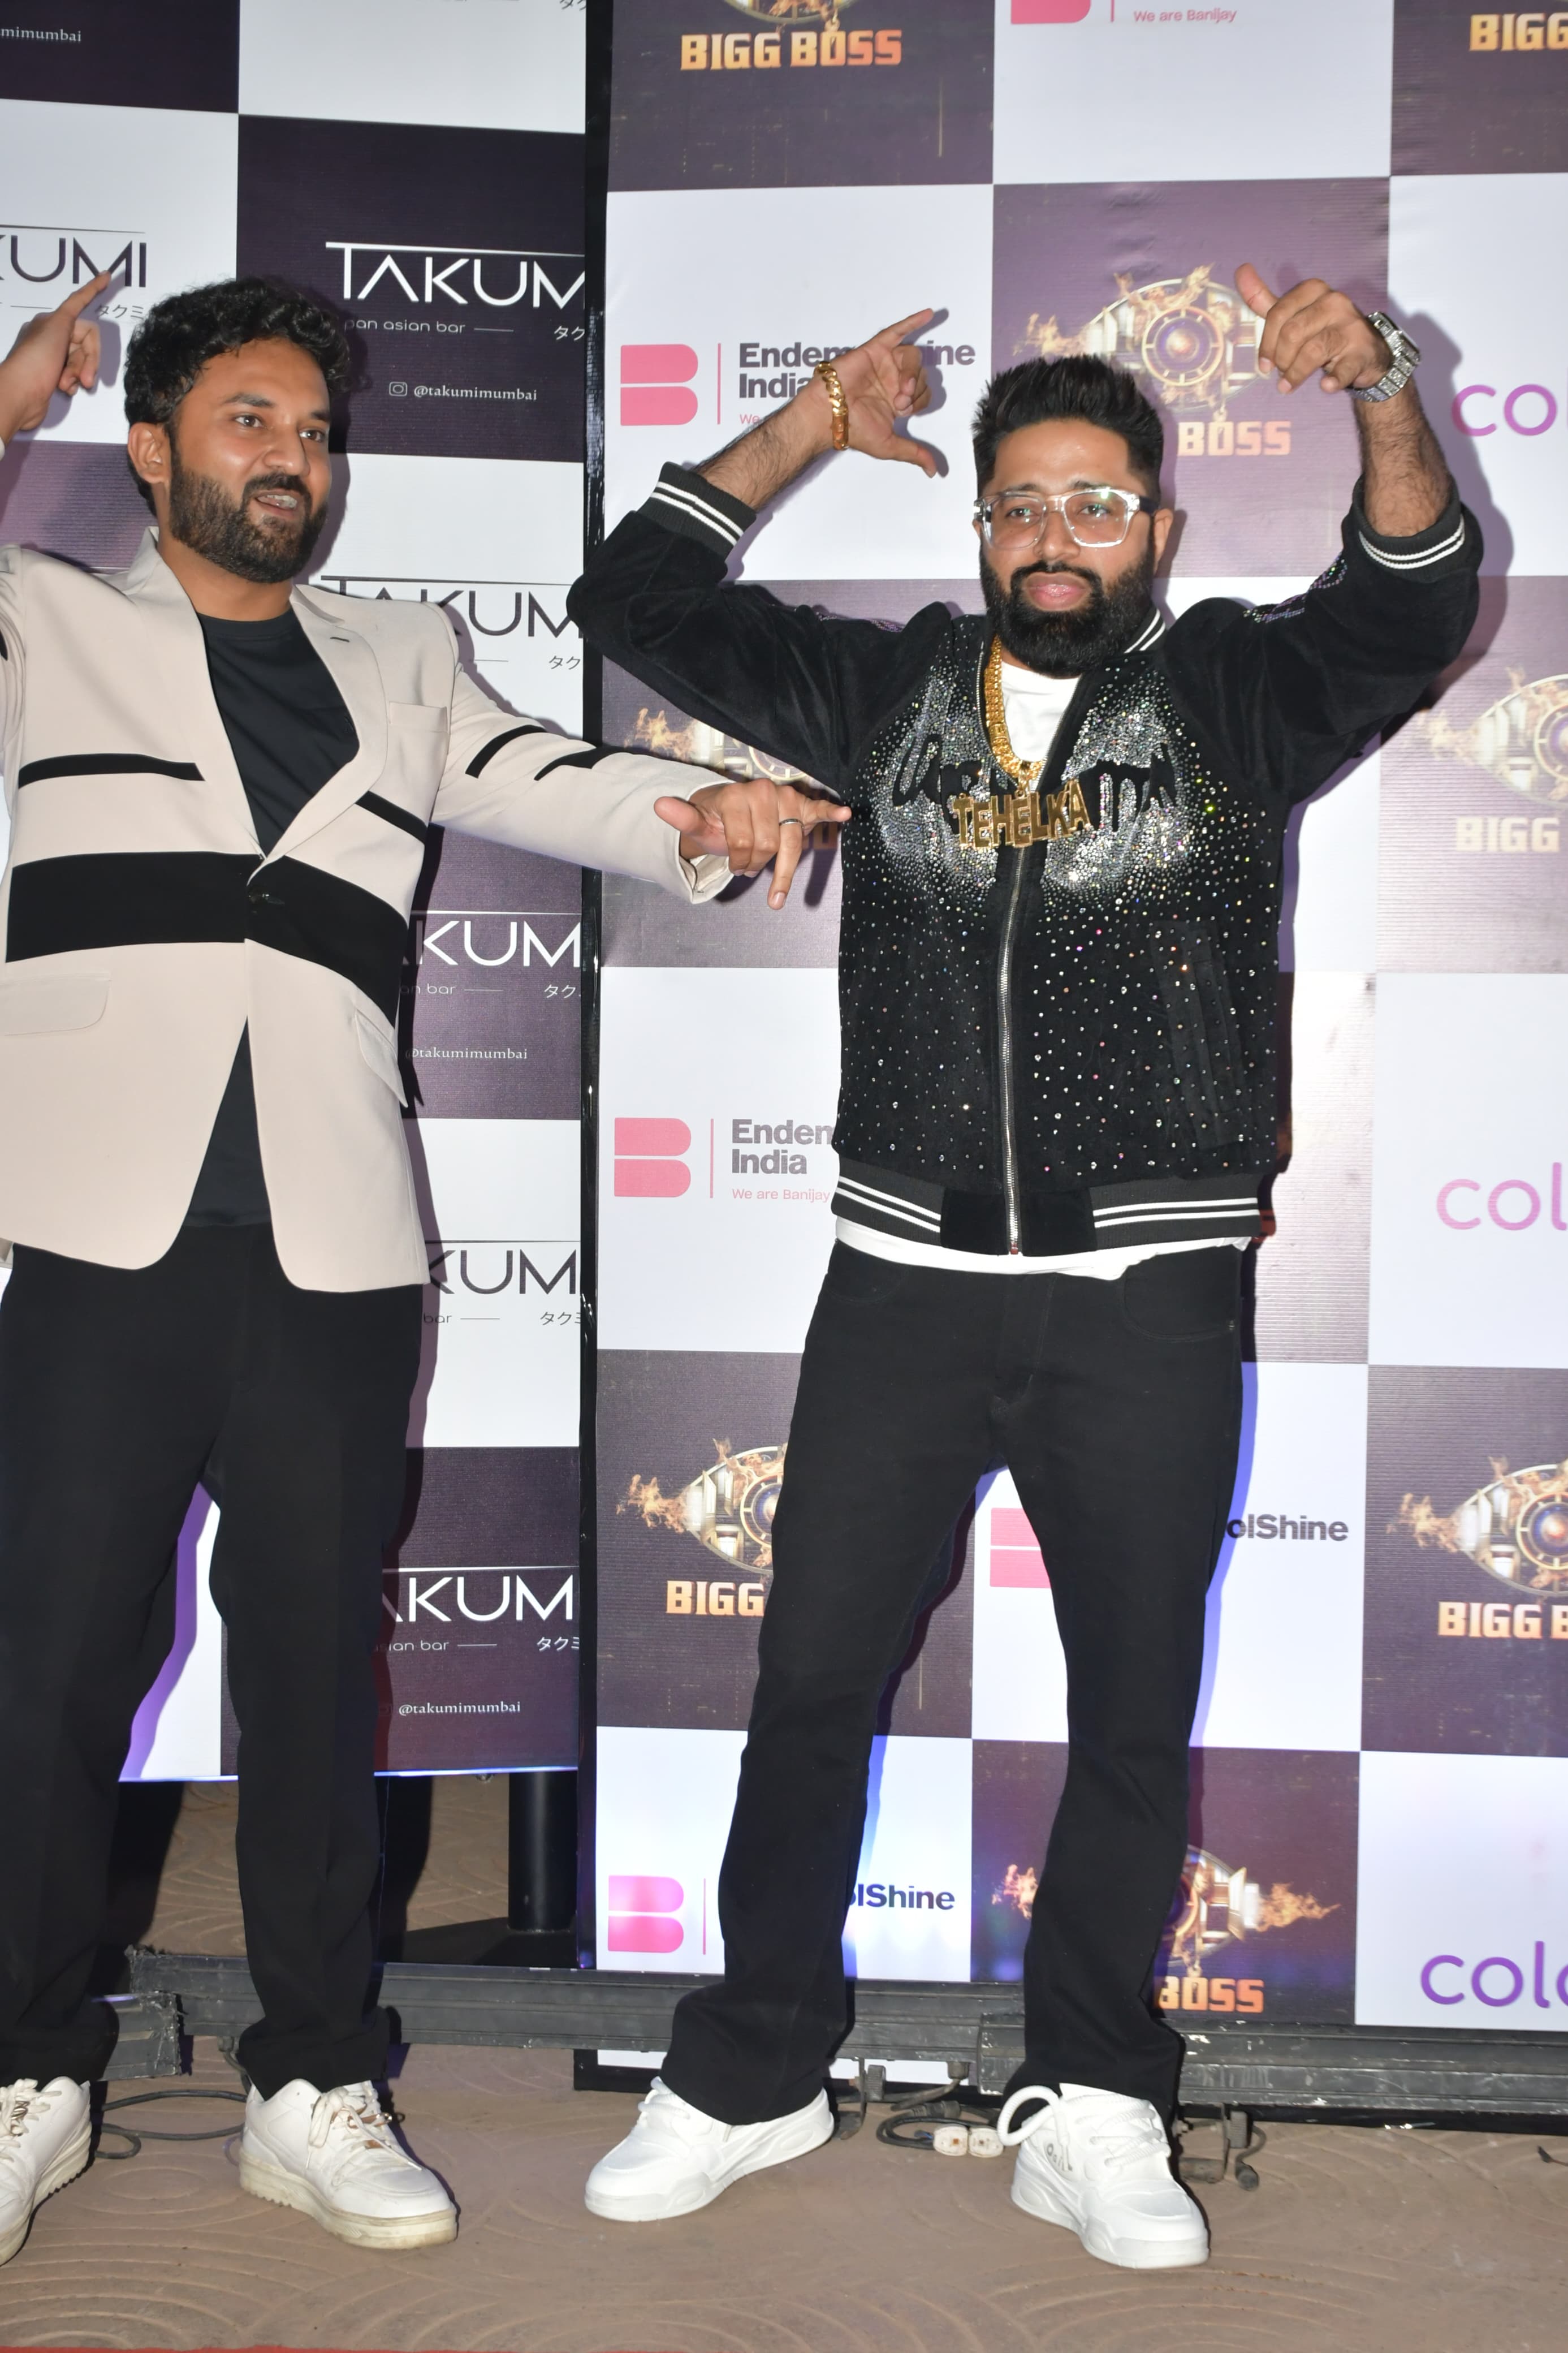 Arun Mashetty and Tehlka Bhai were seen together on the red carpet, flaunting their humorous banter and bromance